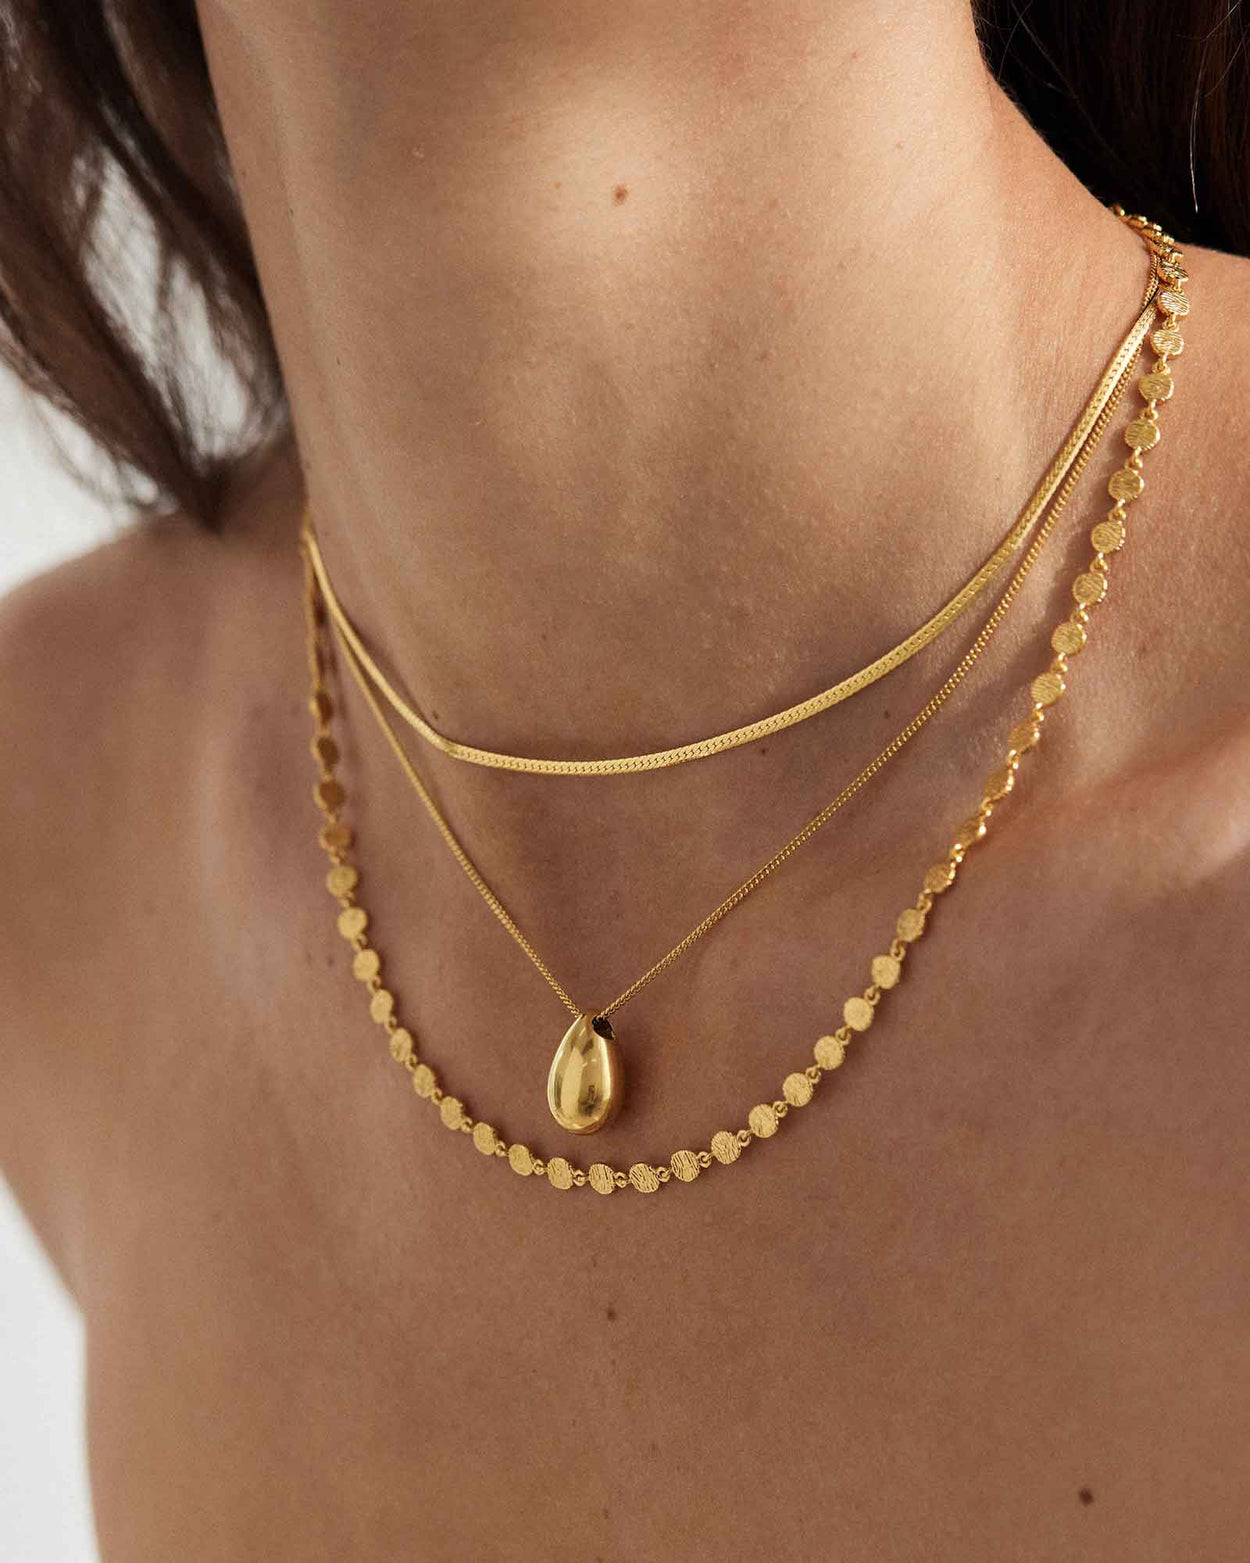 GLOW CHAIN NECKLACE (18K GOLD PLATED)